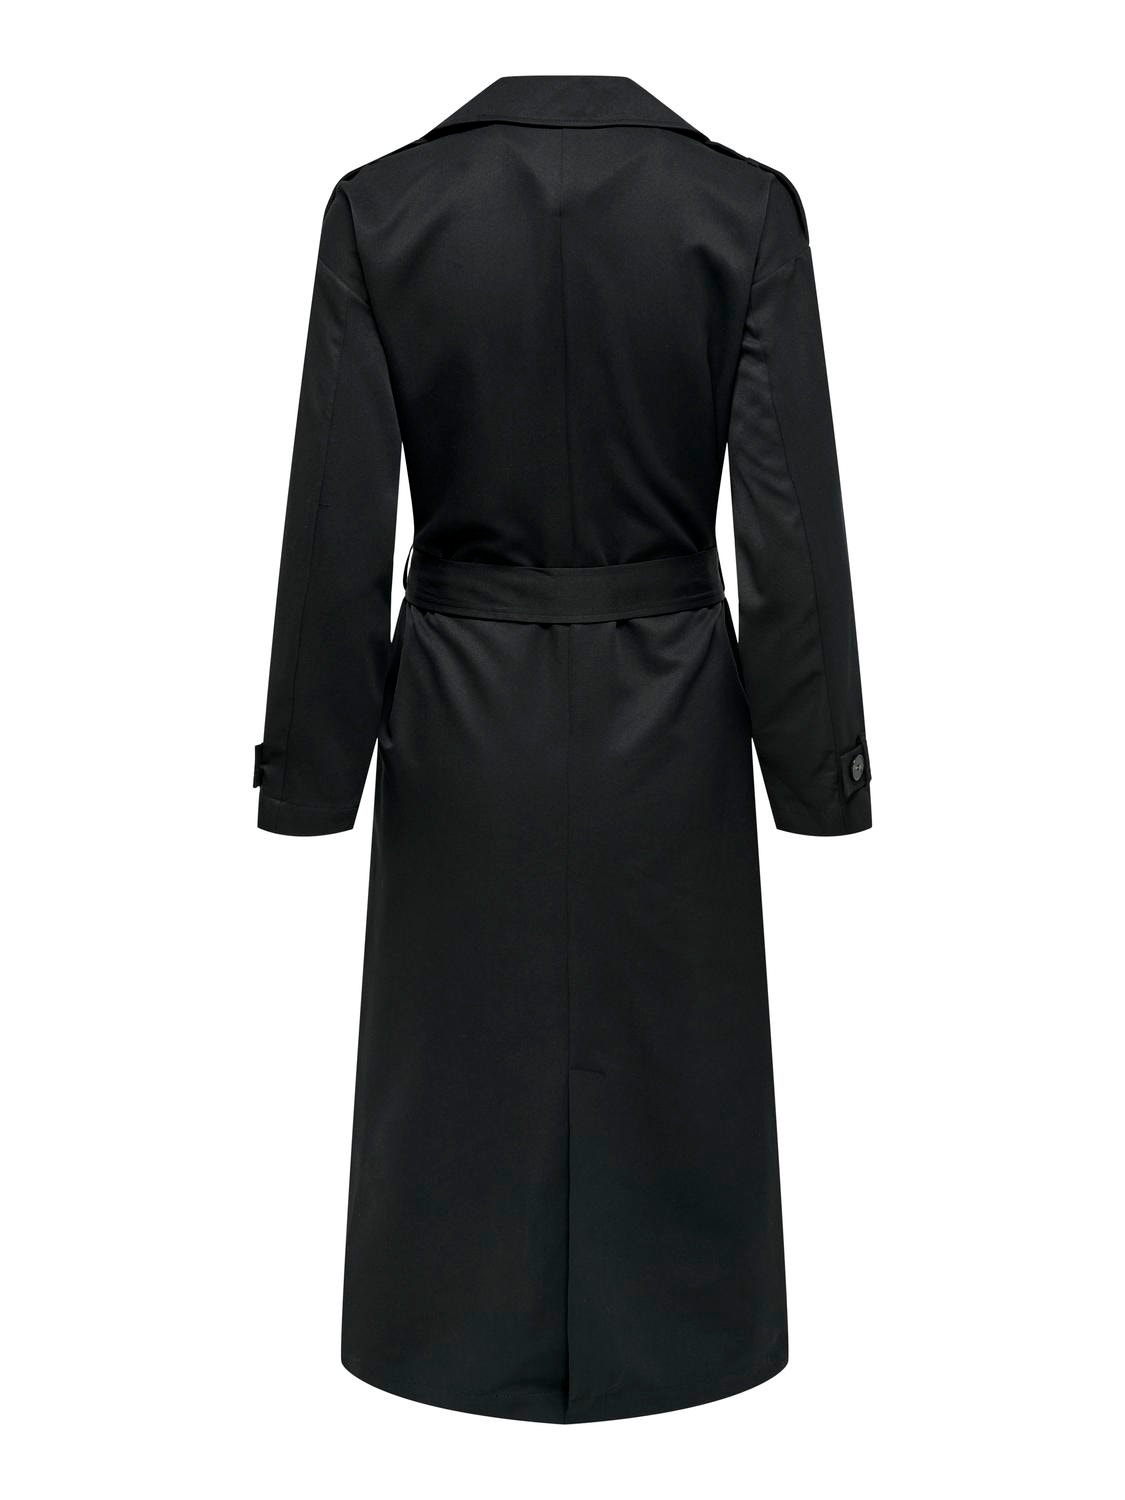 ONLY Long Trenchcoat -Black - 15217799